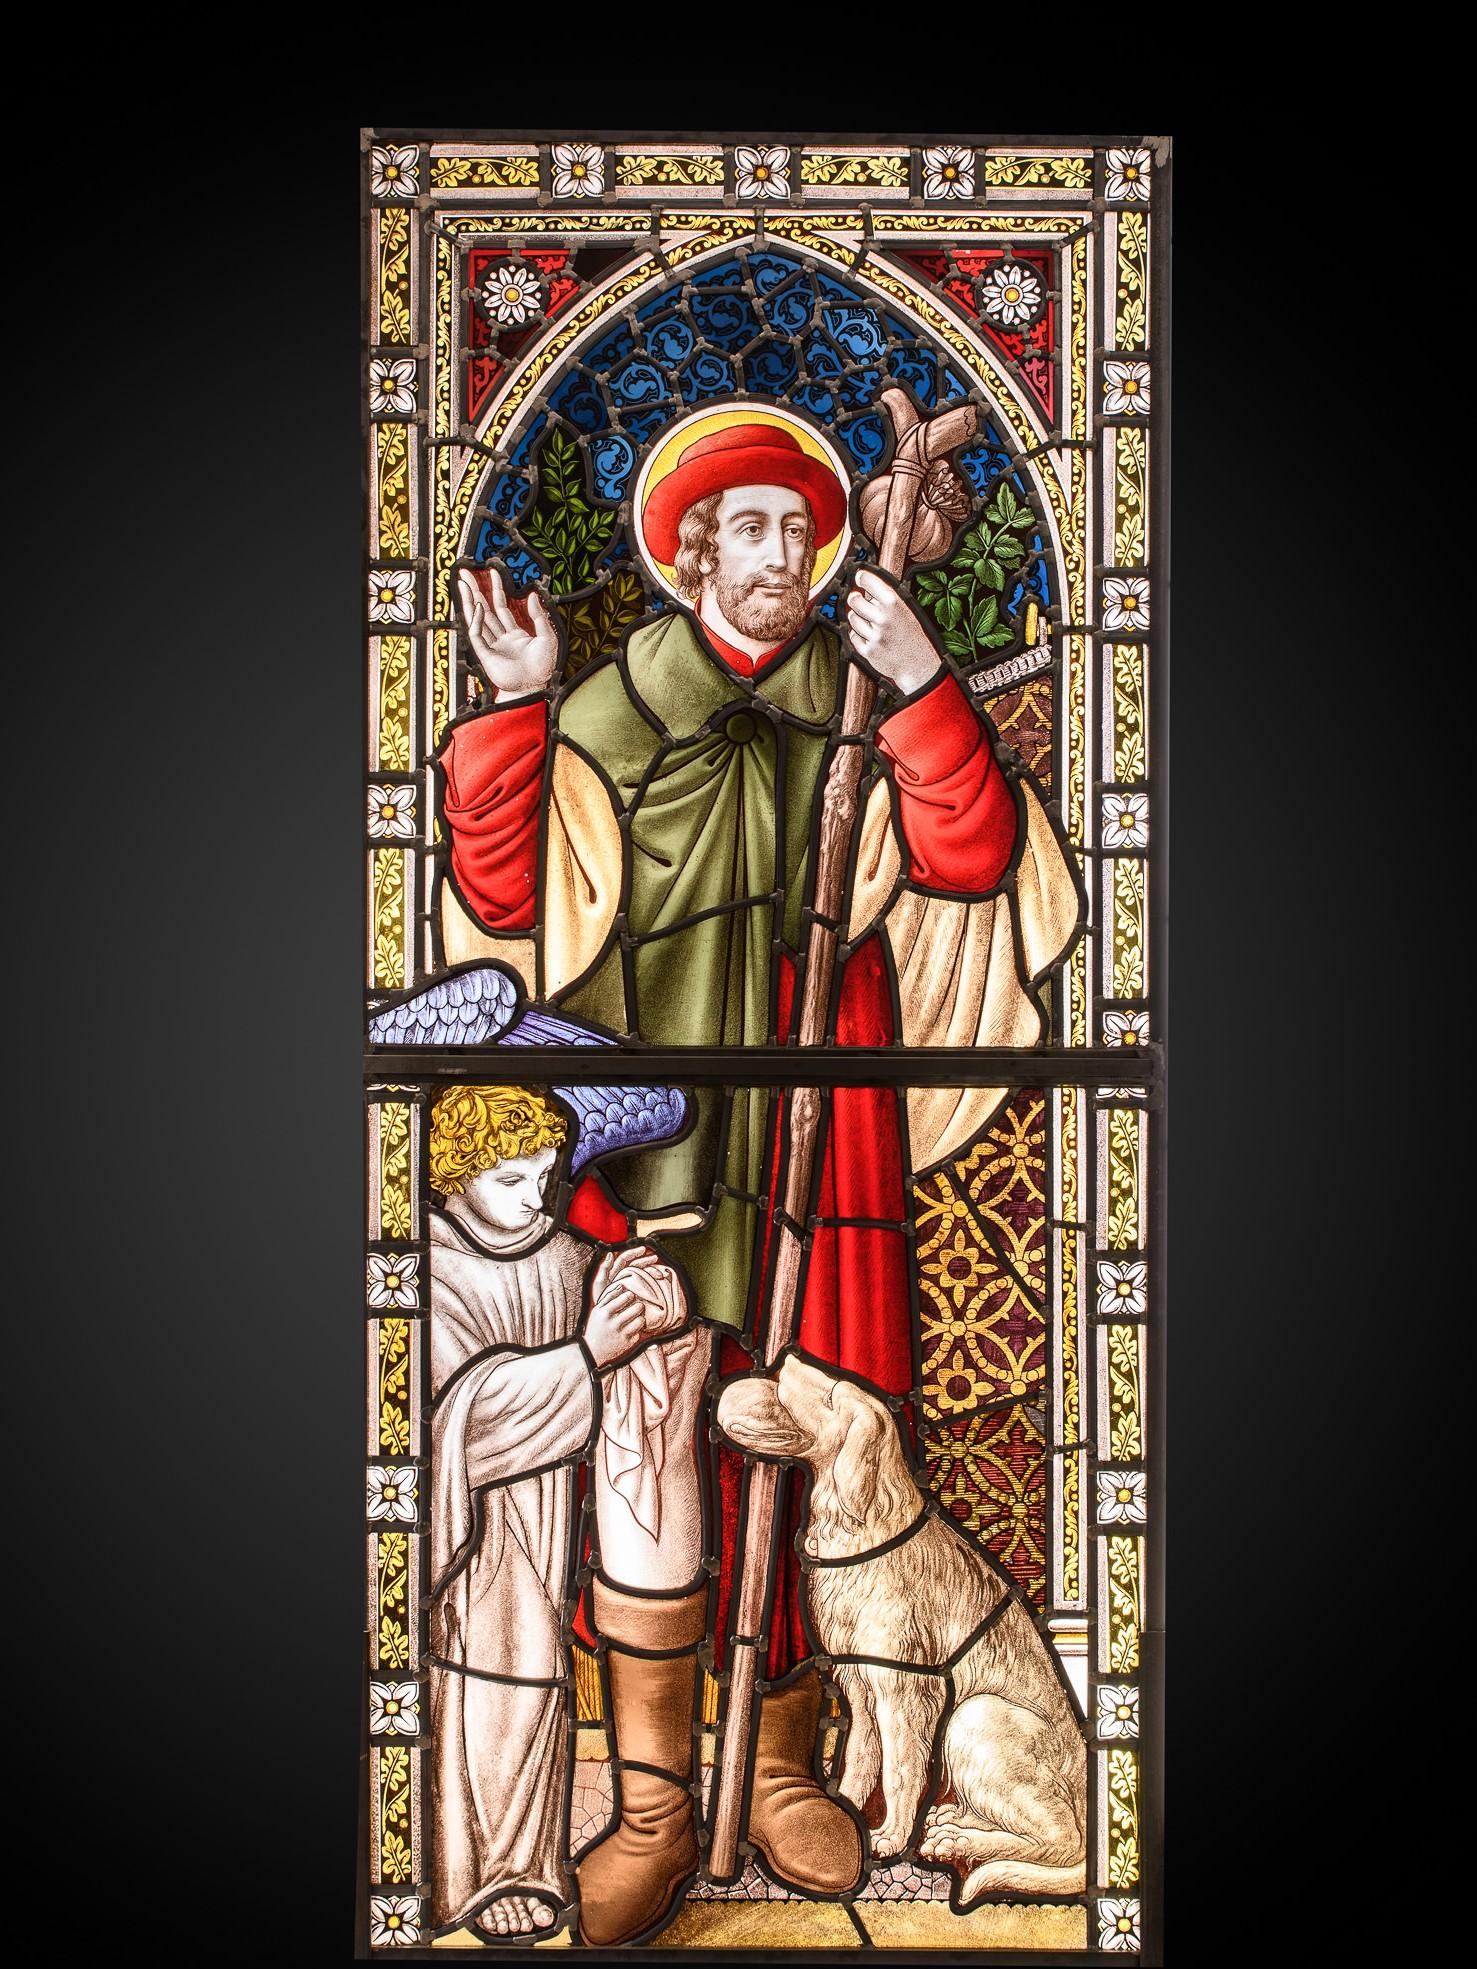 Neo-Gothic Stained Glass Window with St. Roch, Belgium - Painting by Unknown